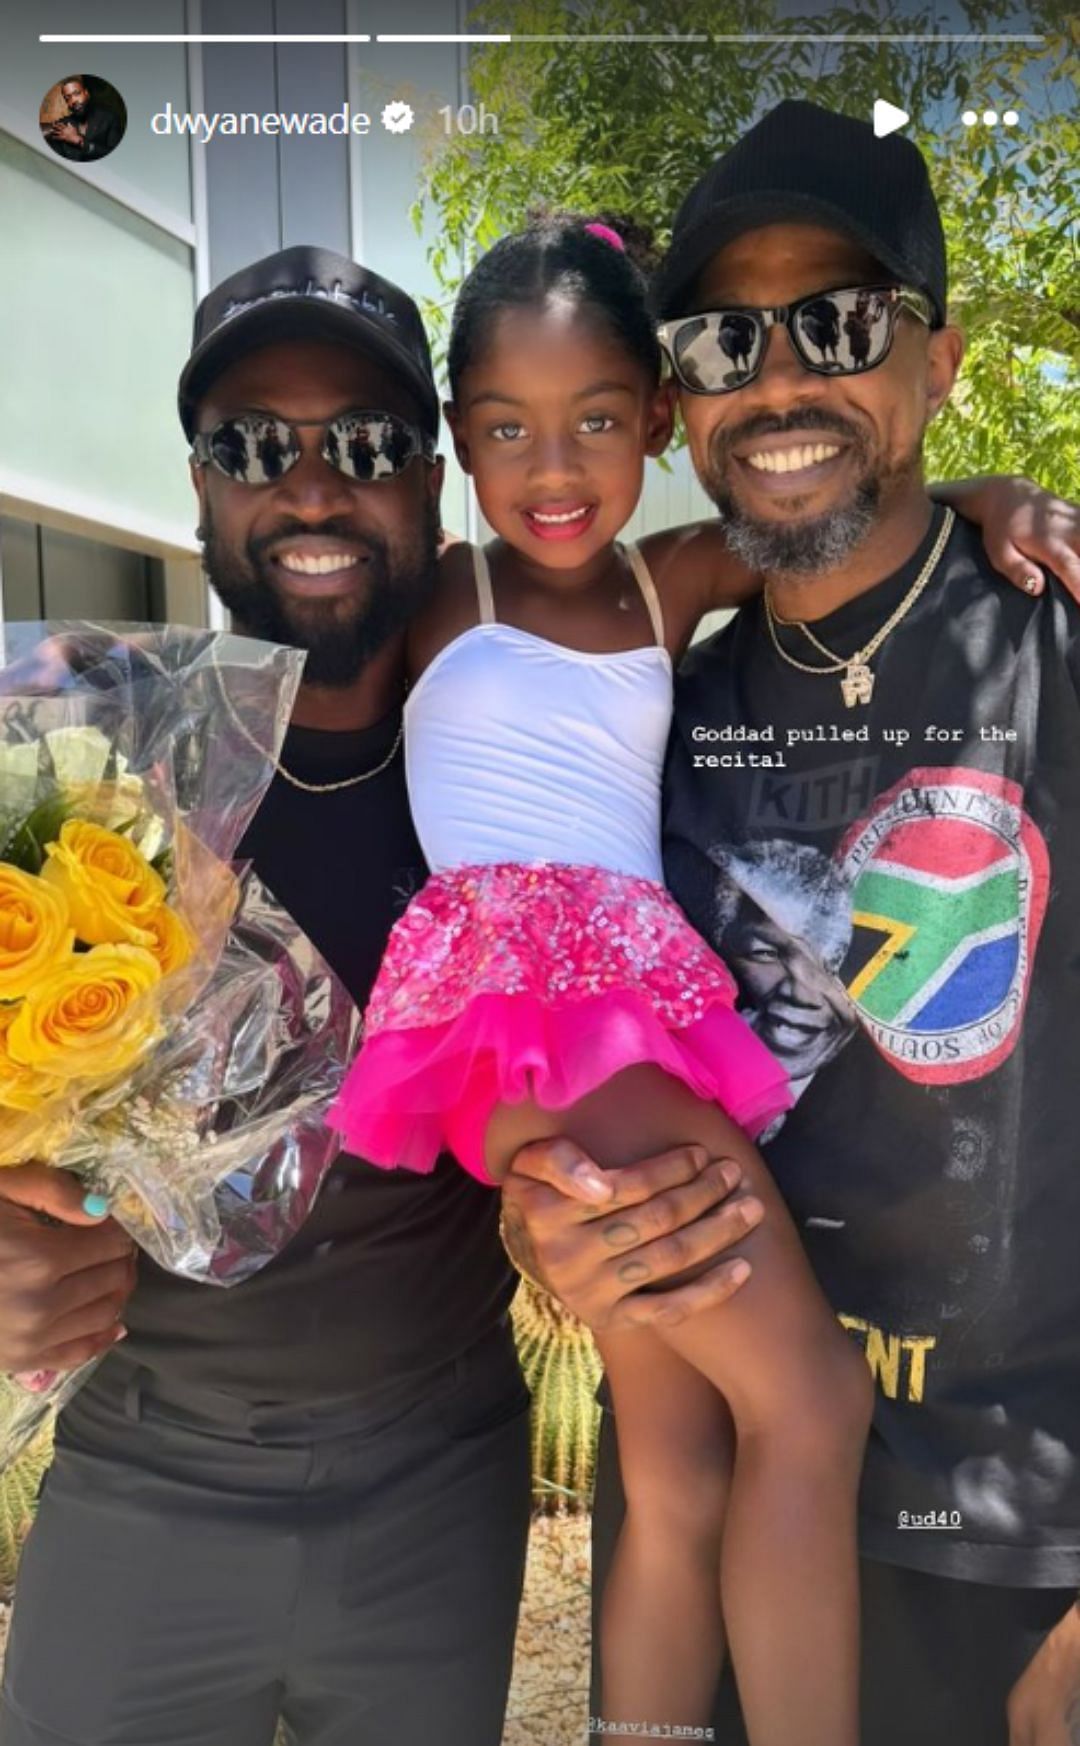 Kaavia poses with her dad and &quot;goddad&quot; at her recital (Image: Wade&#039;s Instagram story)